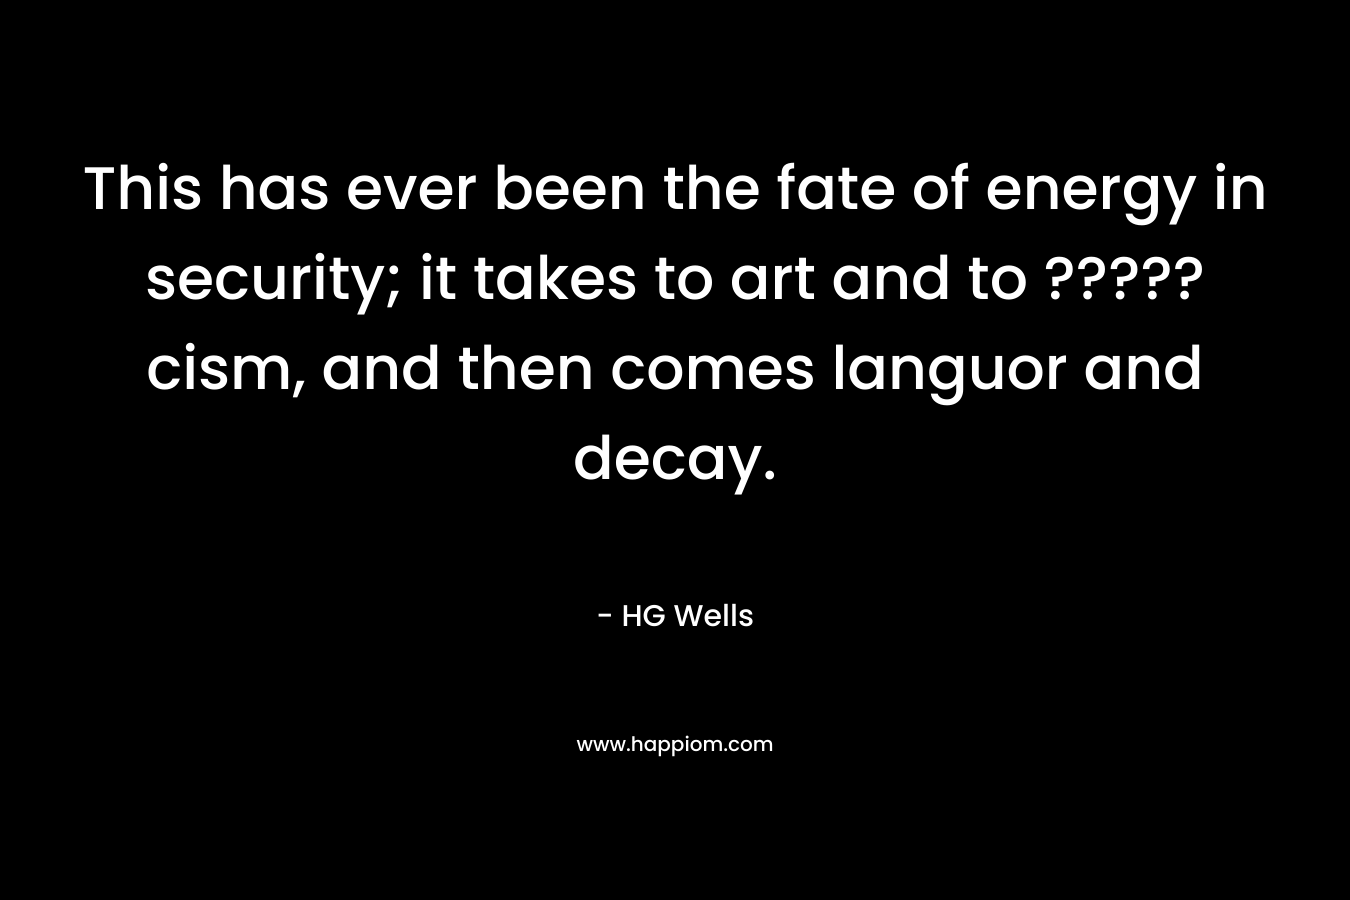 This has ever been the fate of energy in security; it takes to art and to ?????cism, and then comes languor and decay. – HG Wells